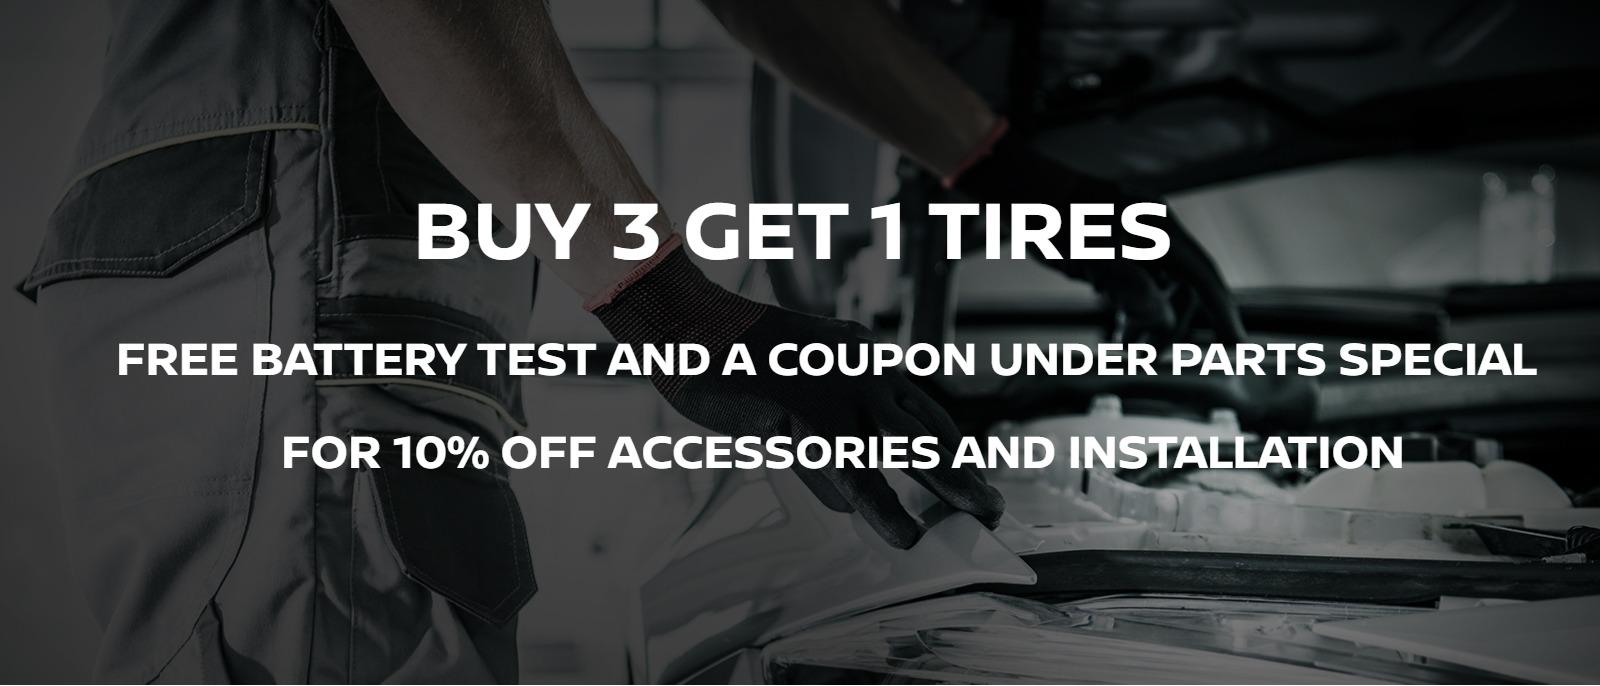 Buy 3 get 1 tires, Free Battery test and a coupon under parts special for 10% off accessories and installation